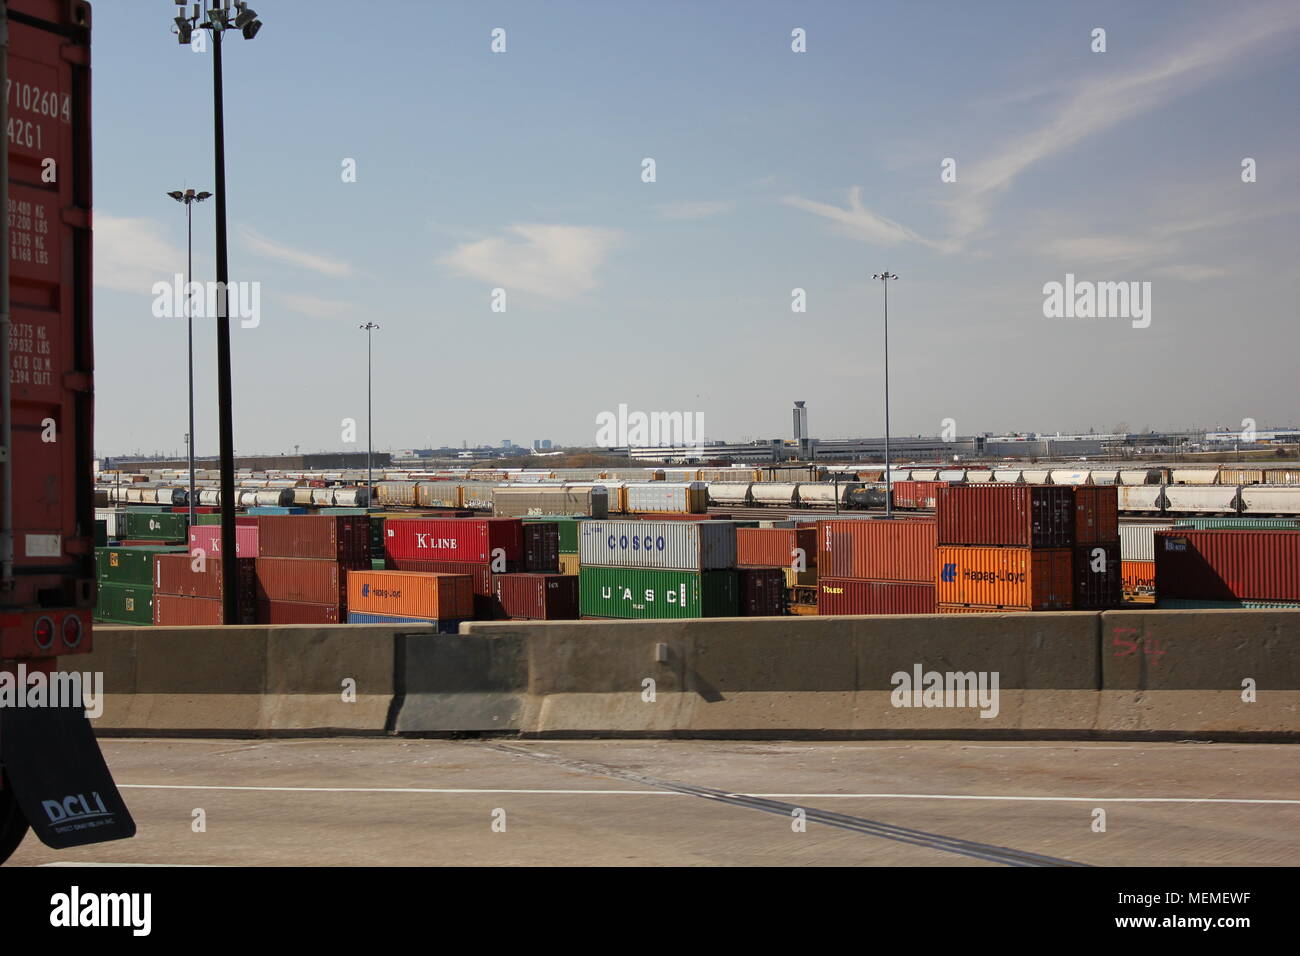 view of cargo shipping yard storage facility with a cargo box placed on a truck riding on a highway. Stock Photo